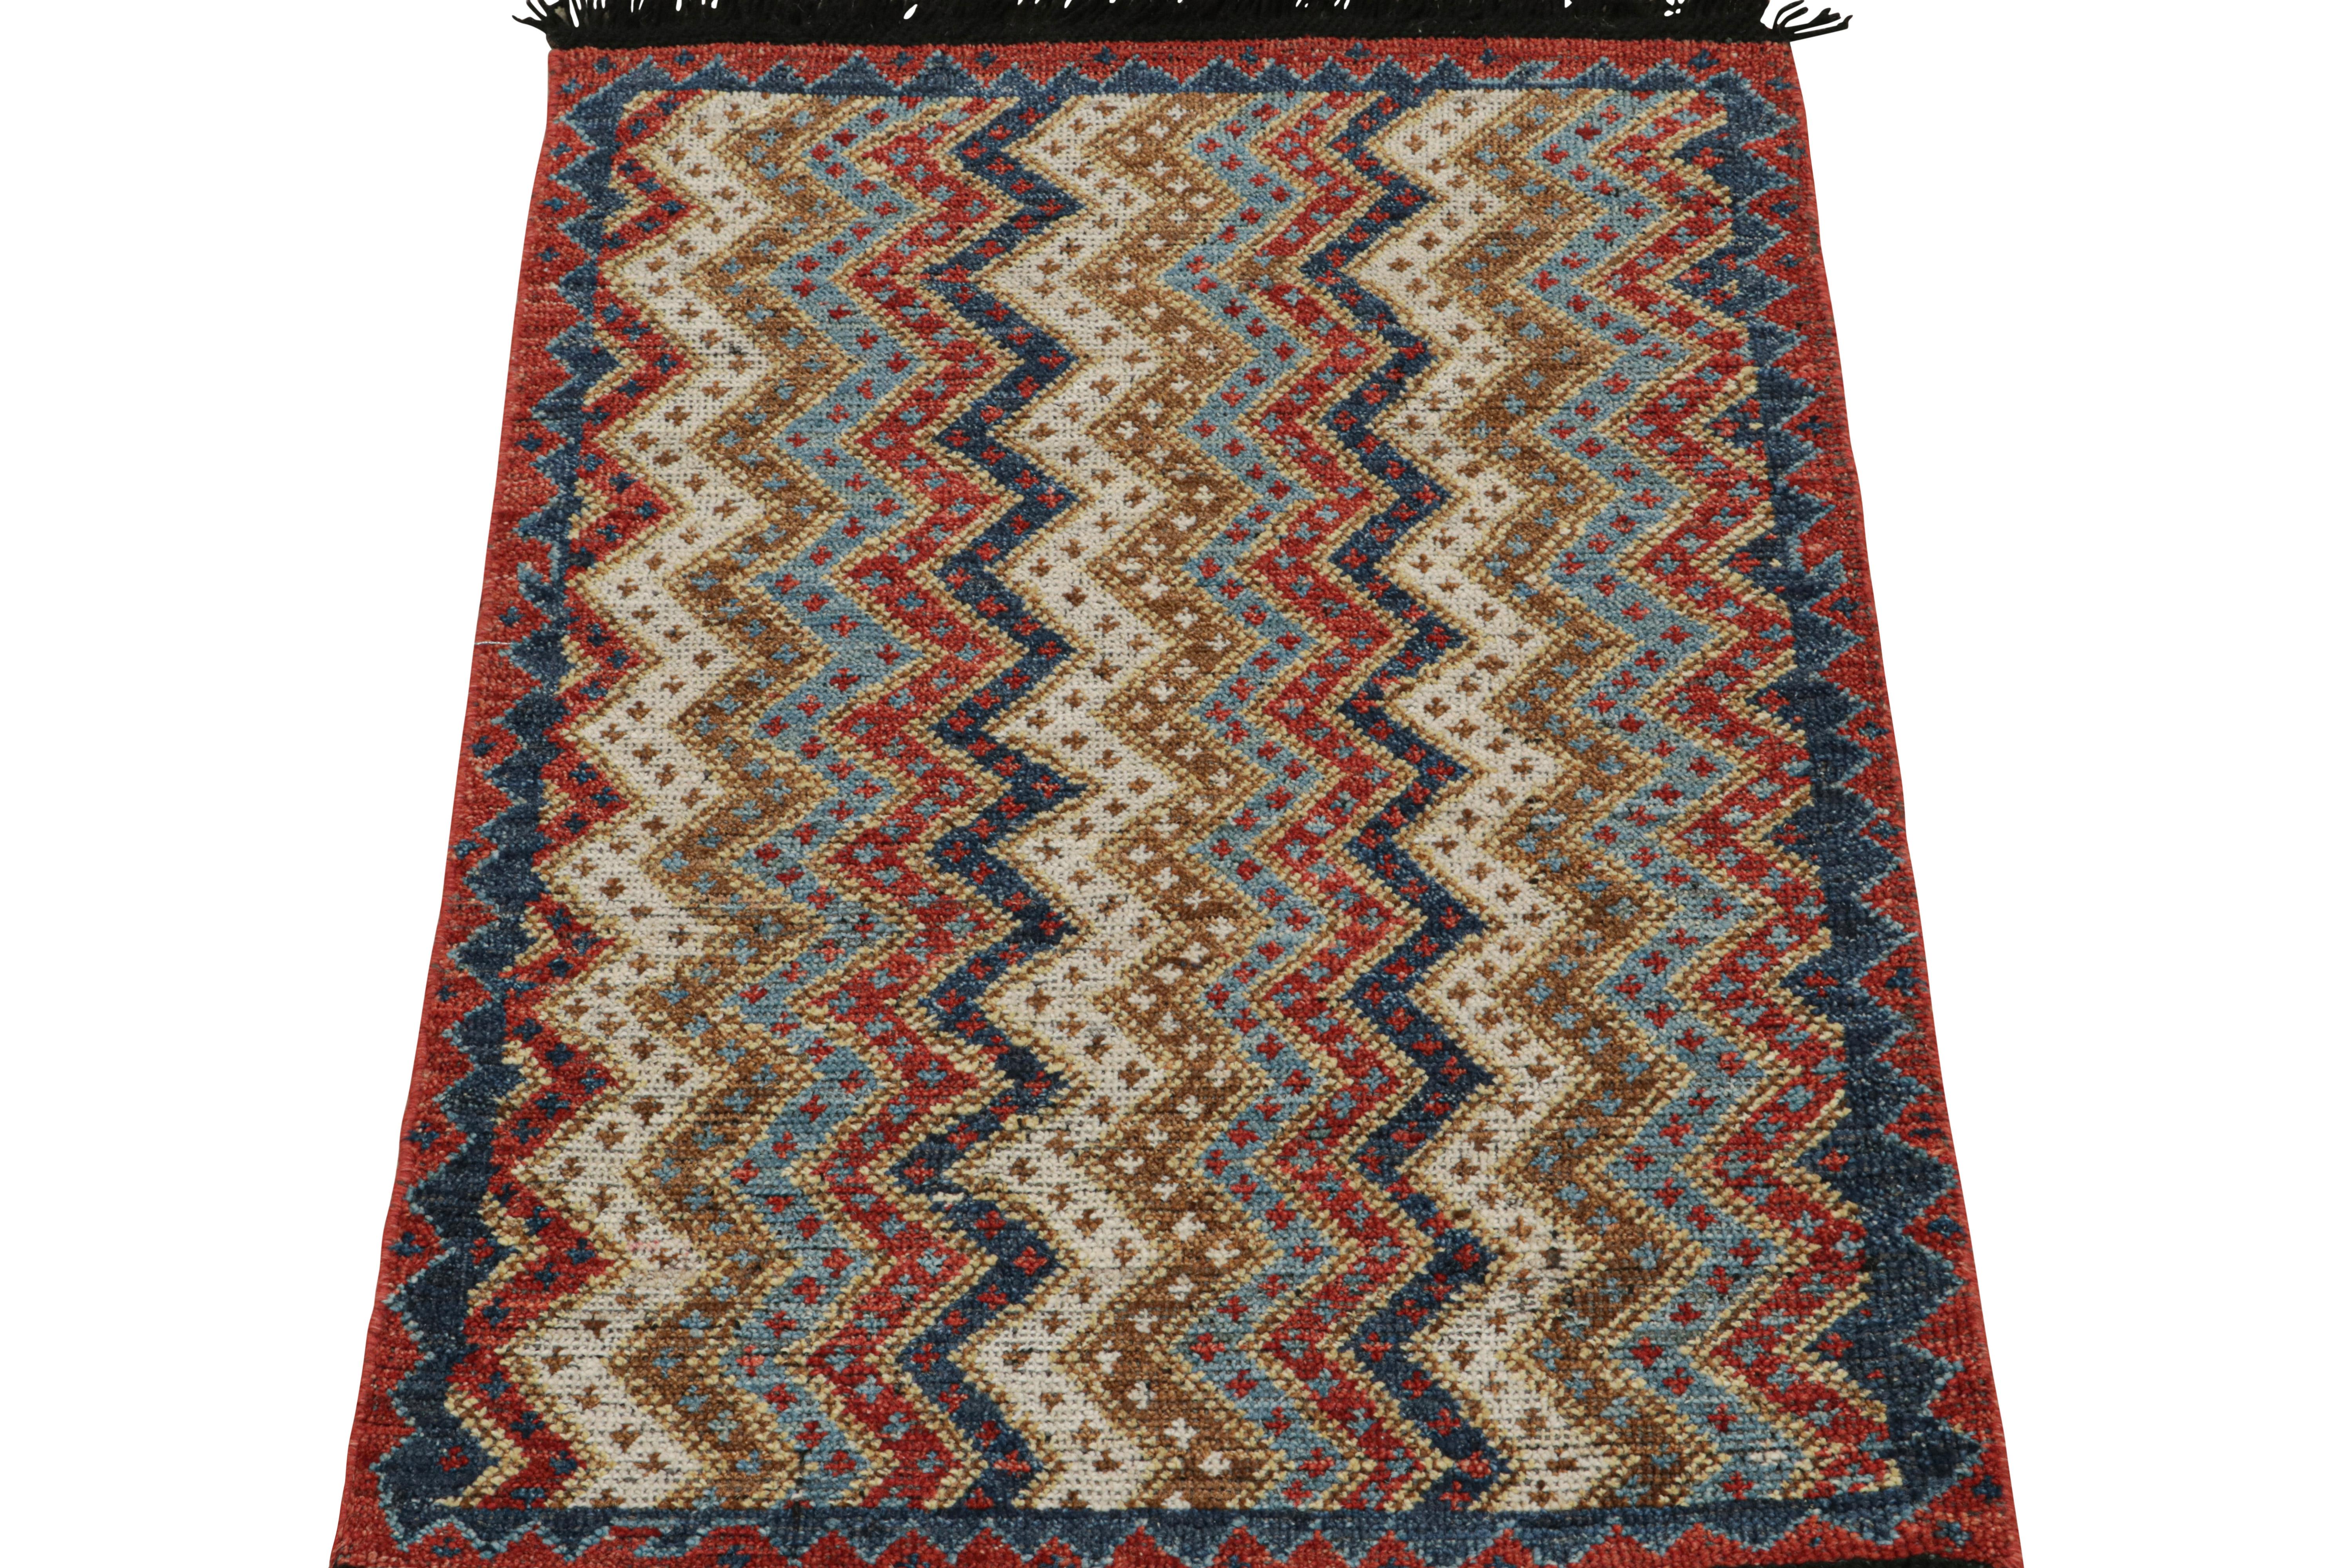 Indian Rug & Kilim’s Antique Tribal Style Rug in Red, Blue and Beige-Brown Chevrons For Sale